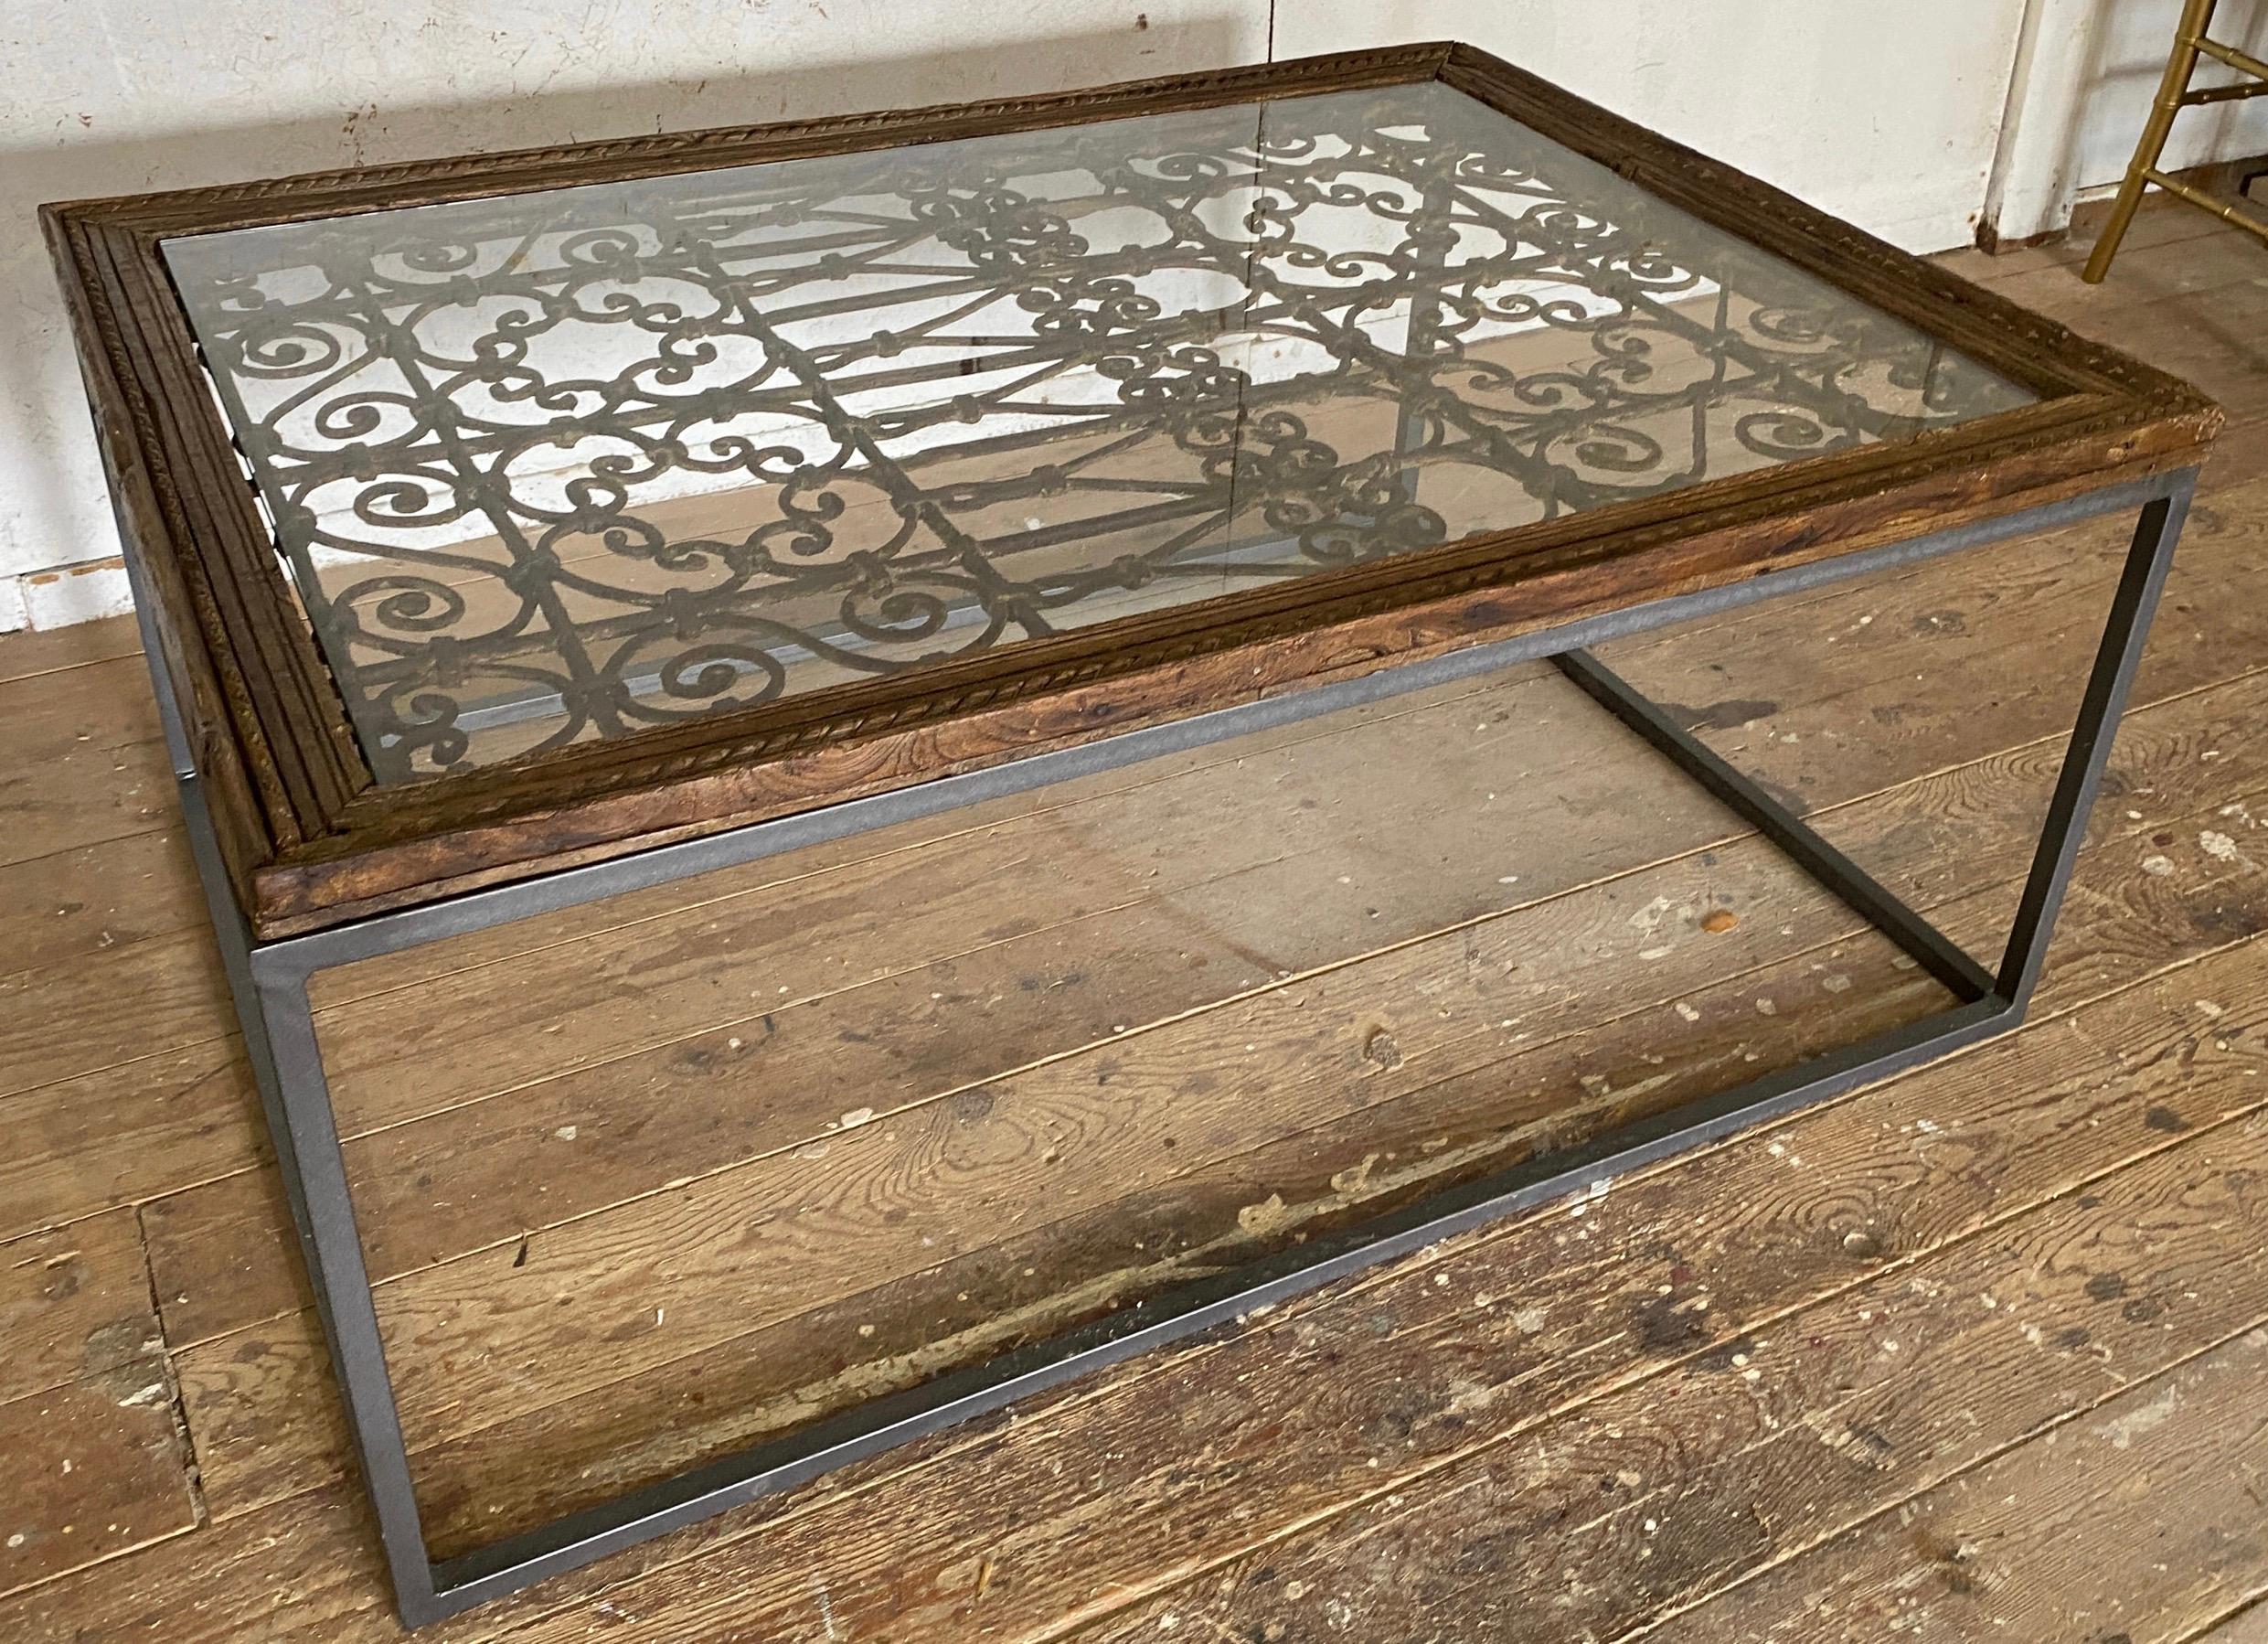 Anglo Raj Antique Indian Iron Window Grate Coffee Table For Sale